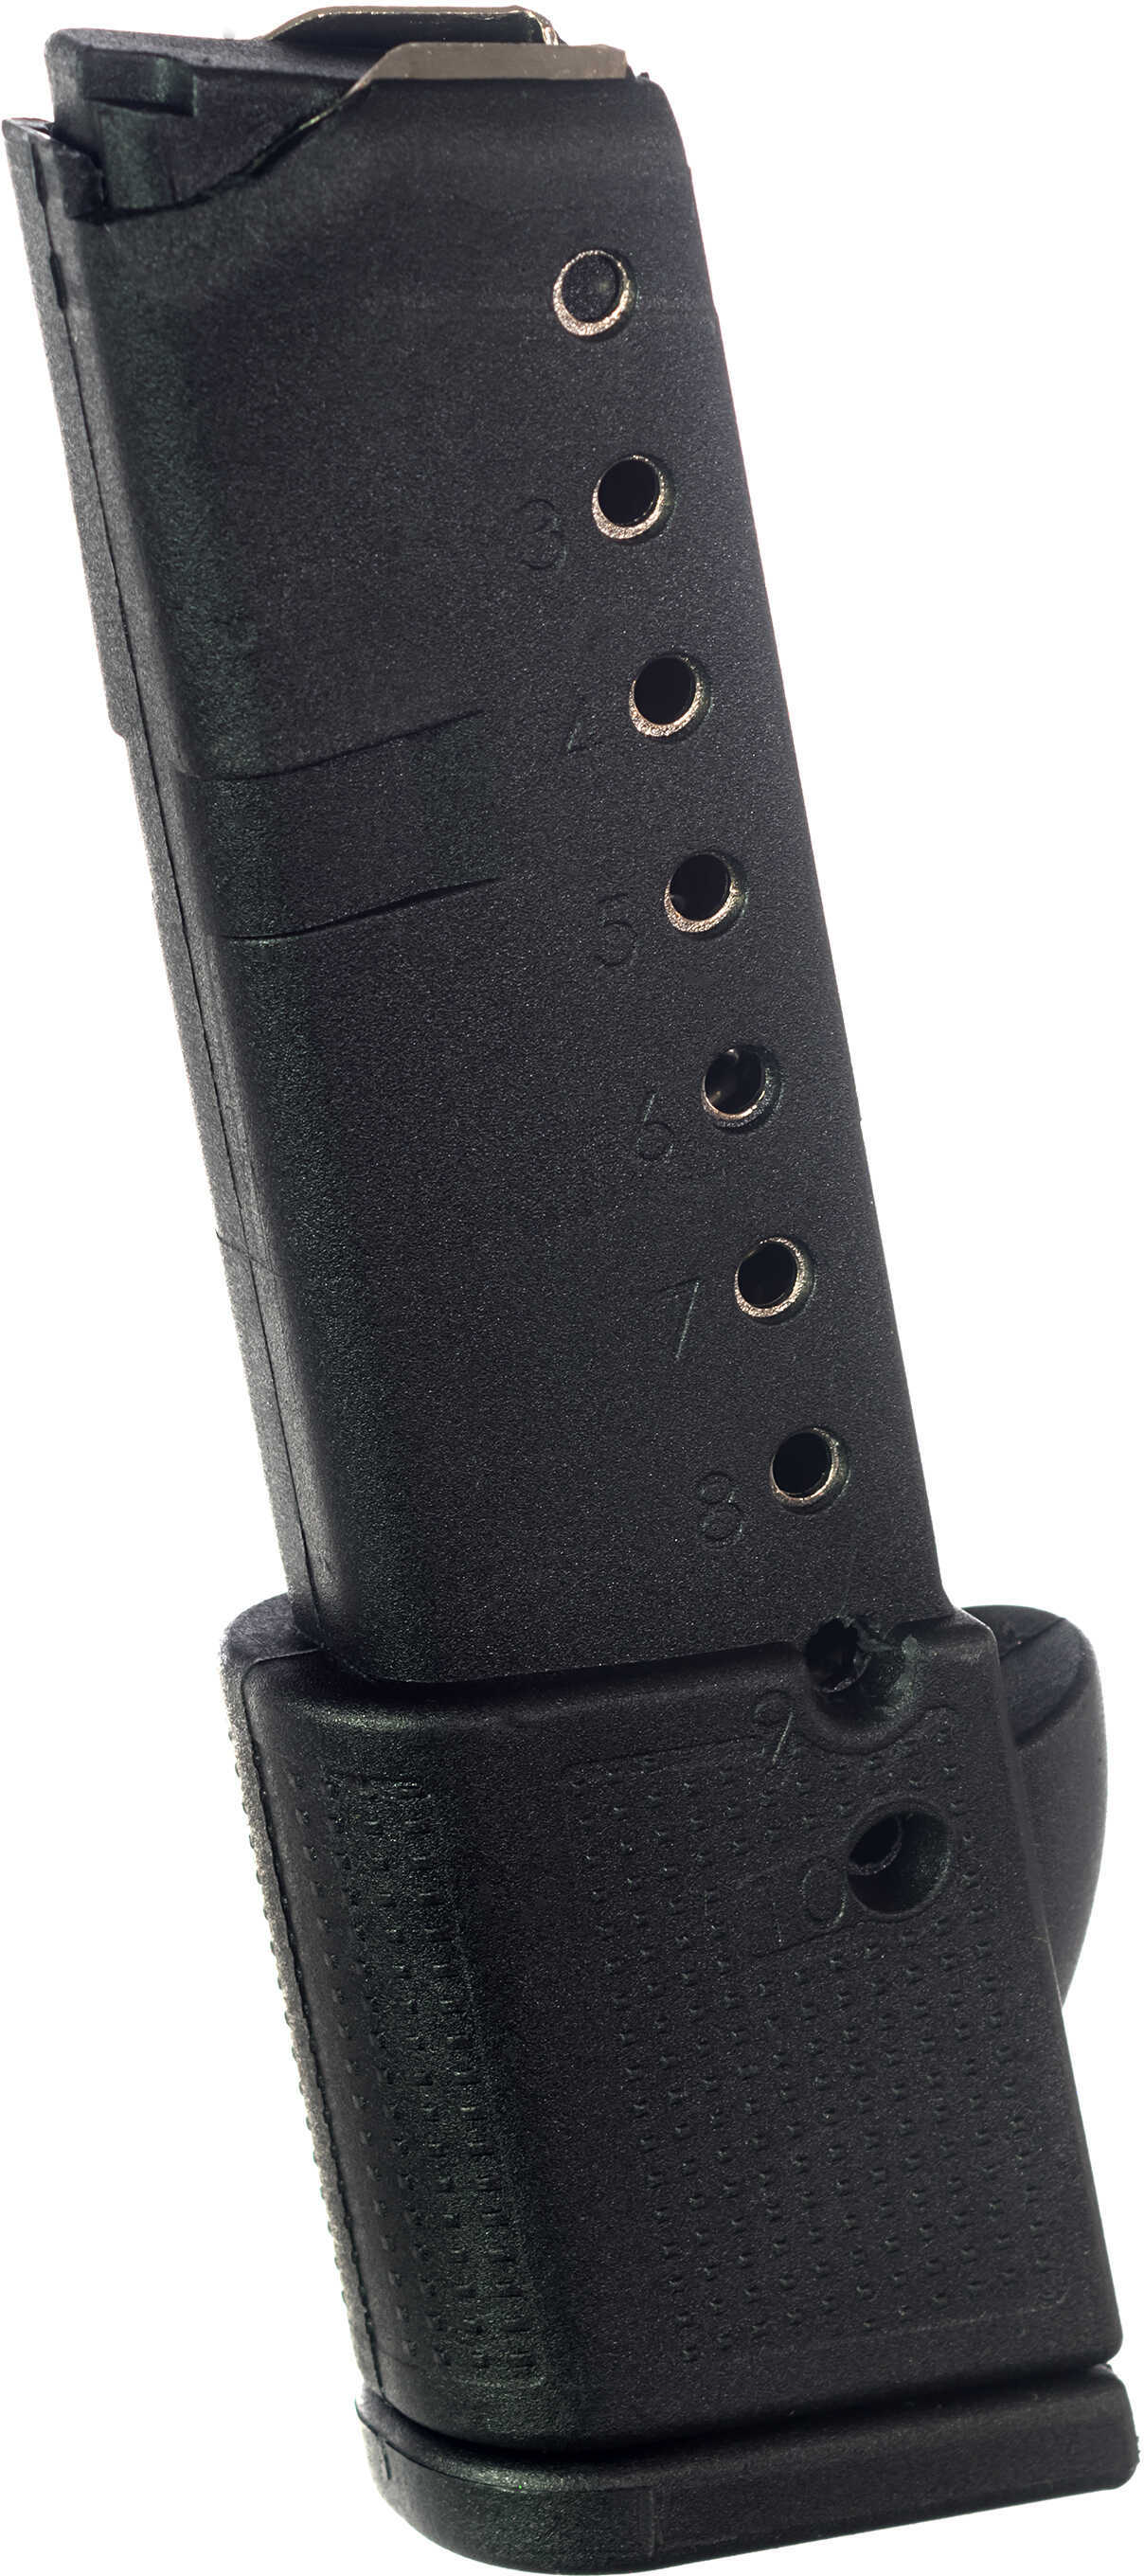 Polymer MAGAZINES .380 ACP For Glock~ 42